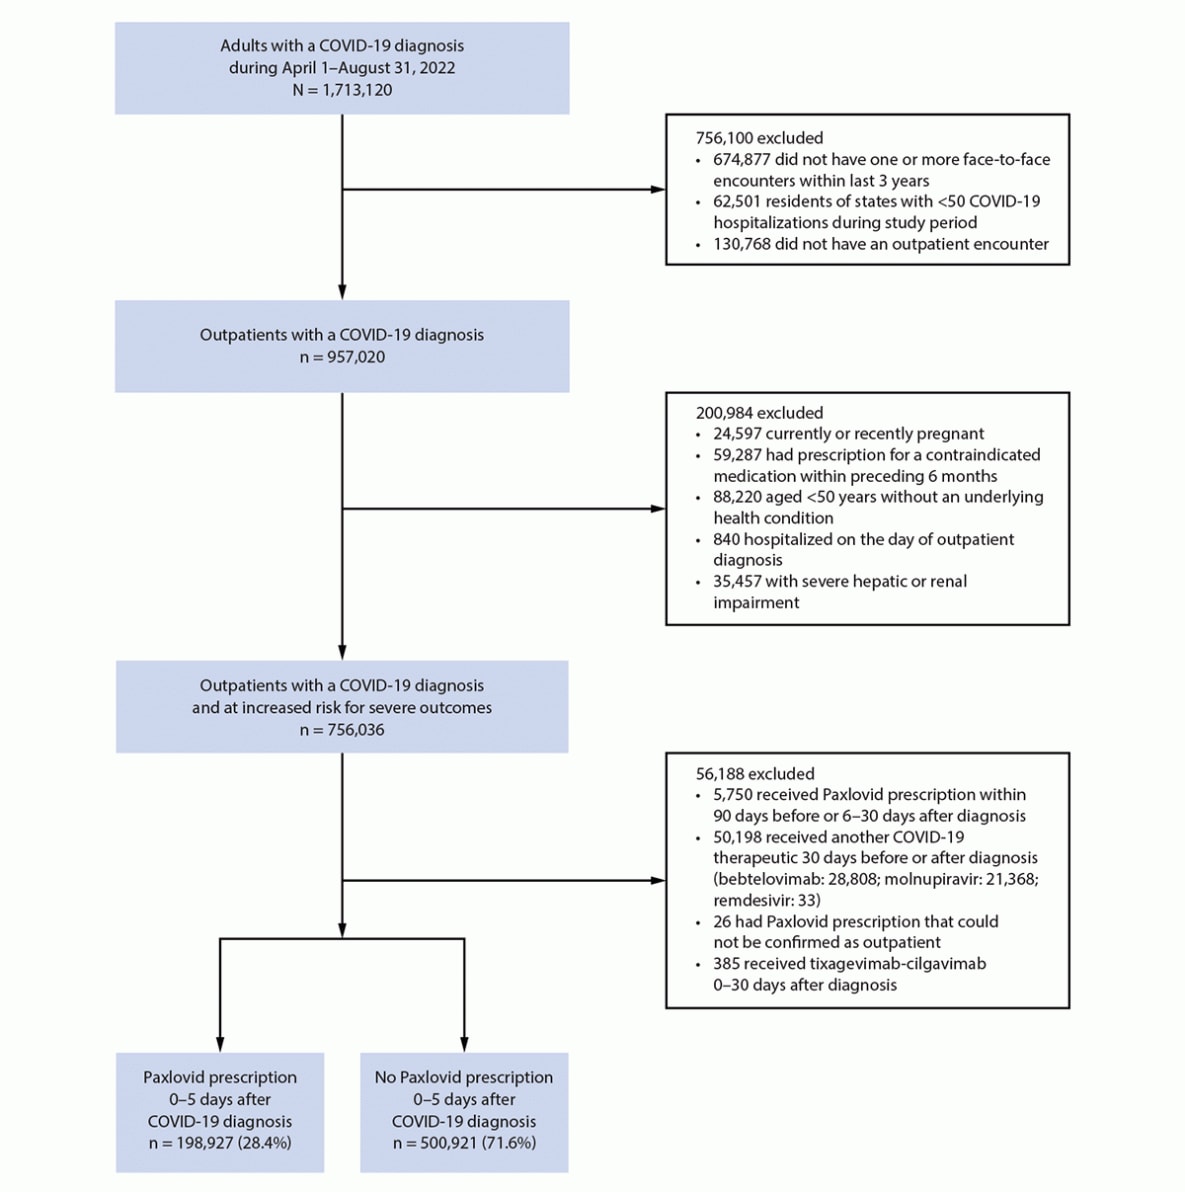 The figure is a flow chart outlining the identification of patient records in the Cosmos data set that were used to examine the association between receiving a Paxlovid (nirmatrelvir-ritonavir) prescription within 5 days of COVID-19 diagnosis and COVID-19–associated hospitalization within 30 days in the United States during April–September 2022.